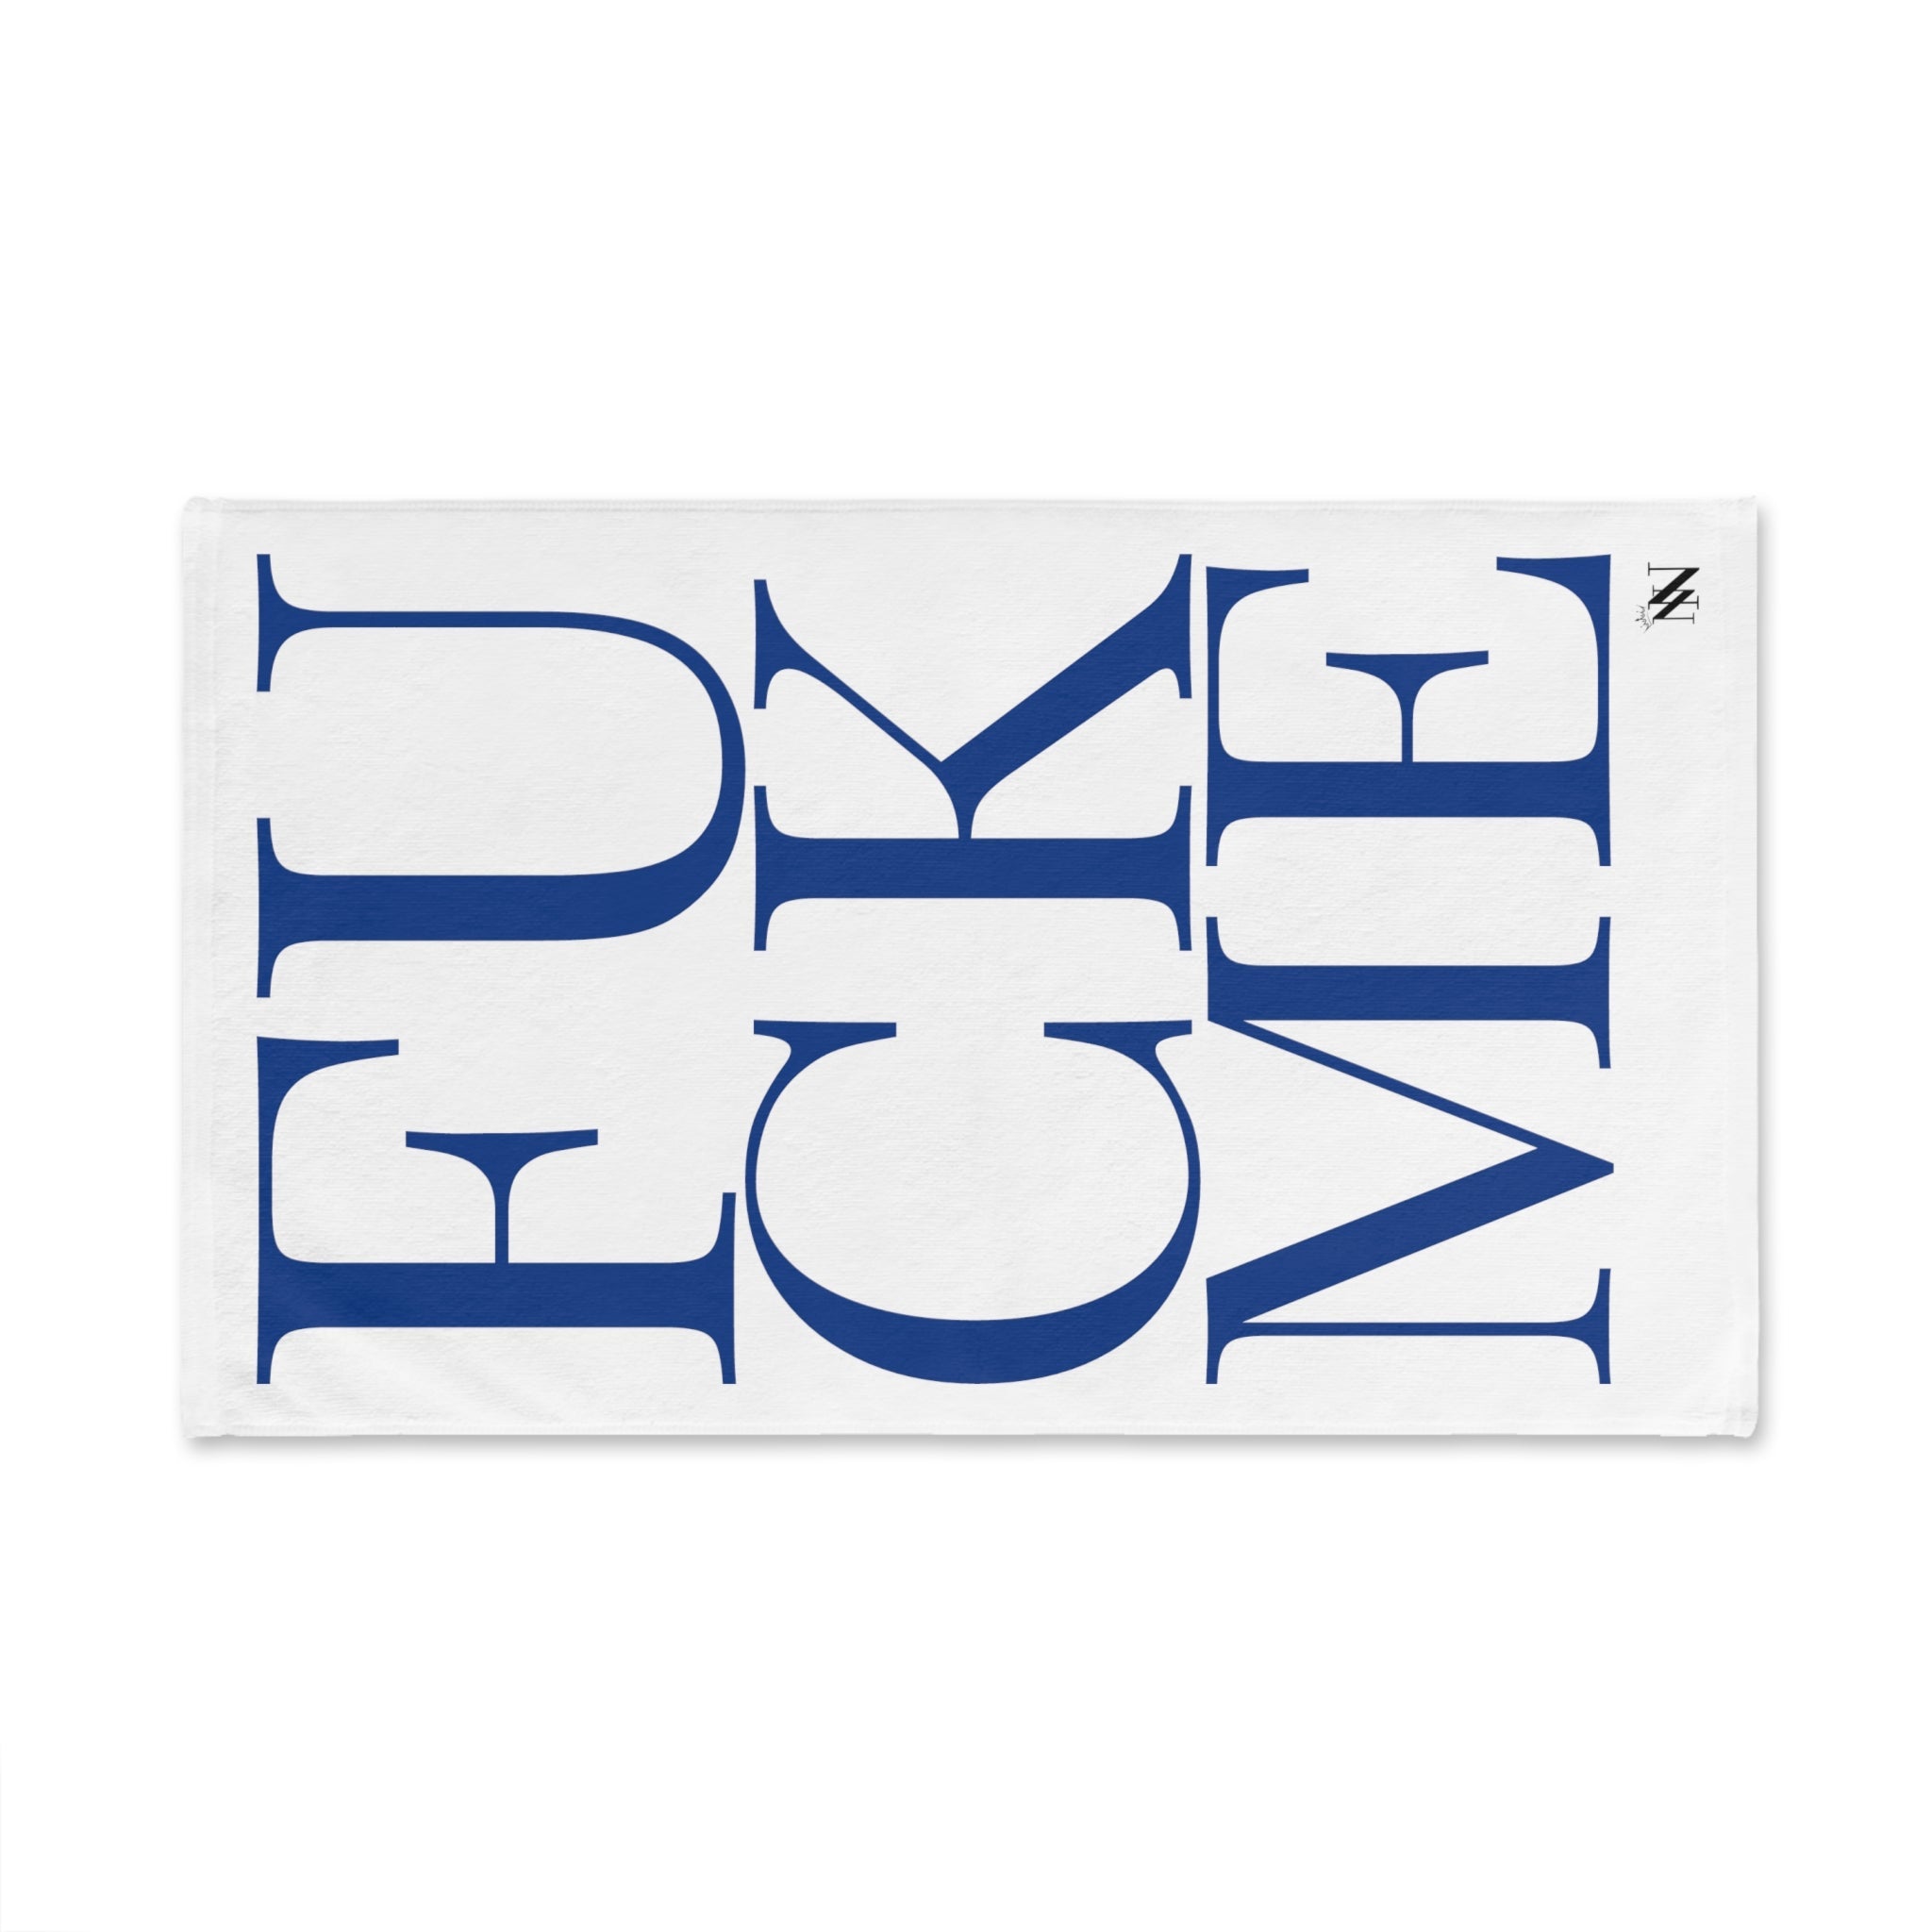 F*ck Me Letter Blue White | Funny Gifts for Men - Gifts for Him - Birthday Gifts for Men, Him, Her, Husband, Boyfriend, Girlfriend, New Couple Gifts, Fathers & Valentines Day Gifts, Christmas Gifts NECTAR NAPKINS